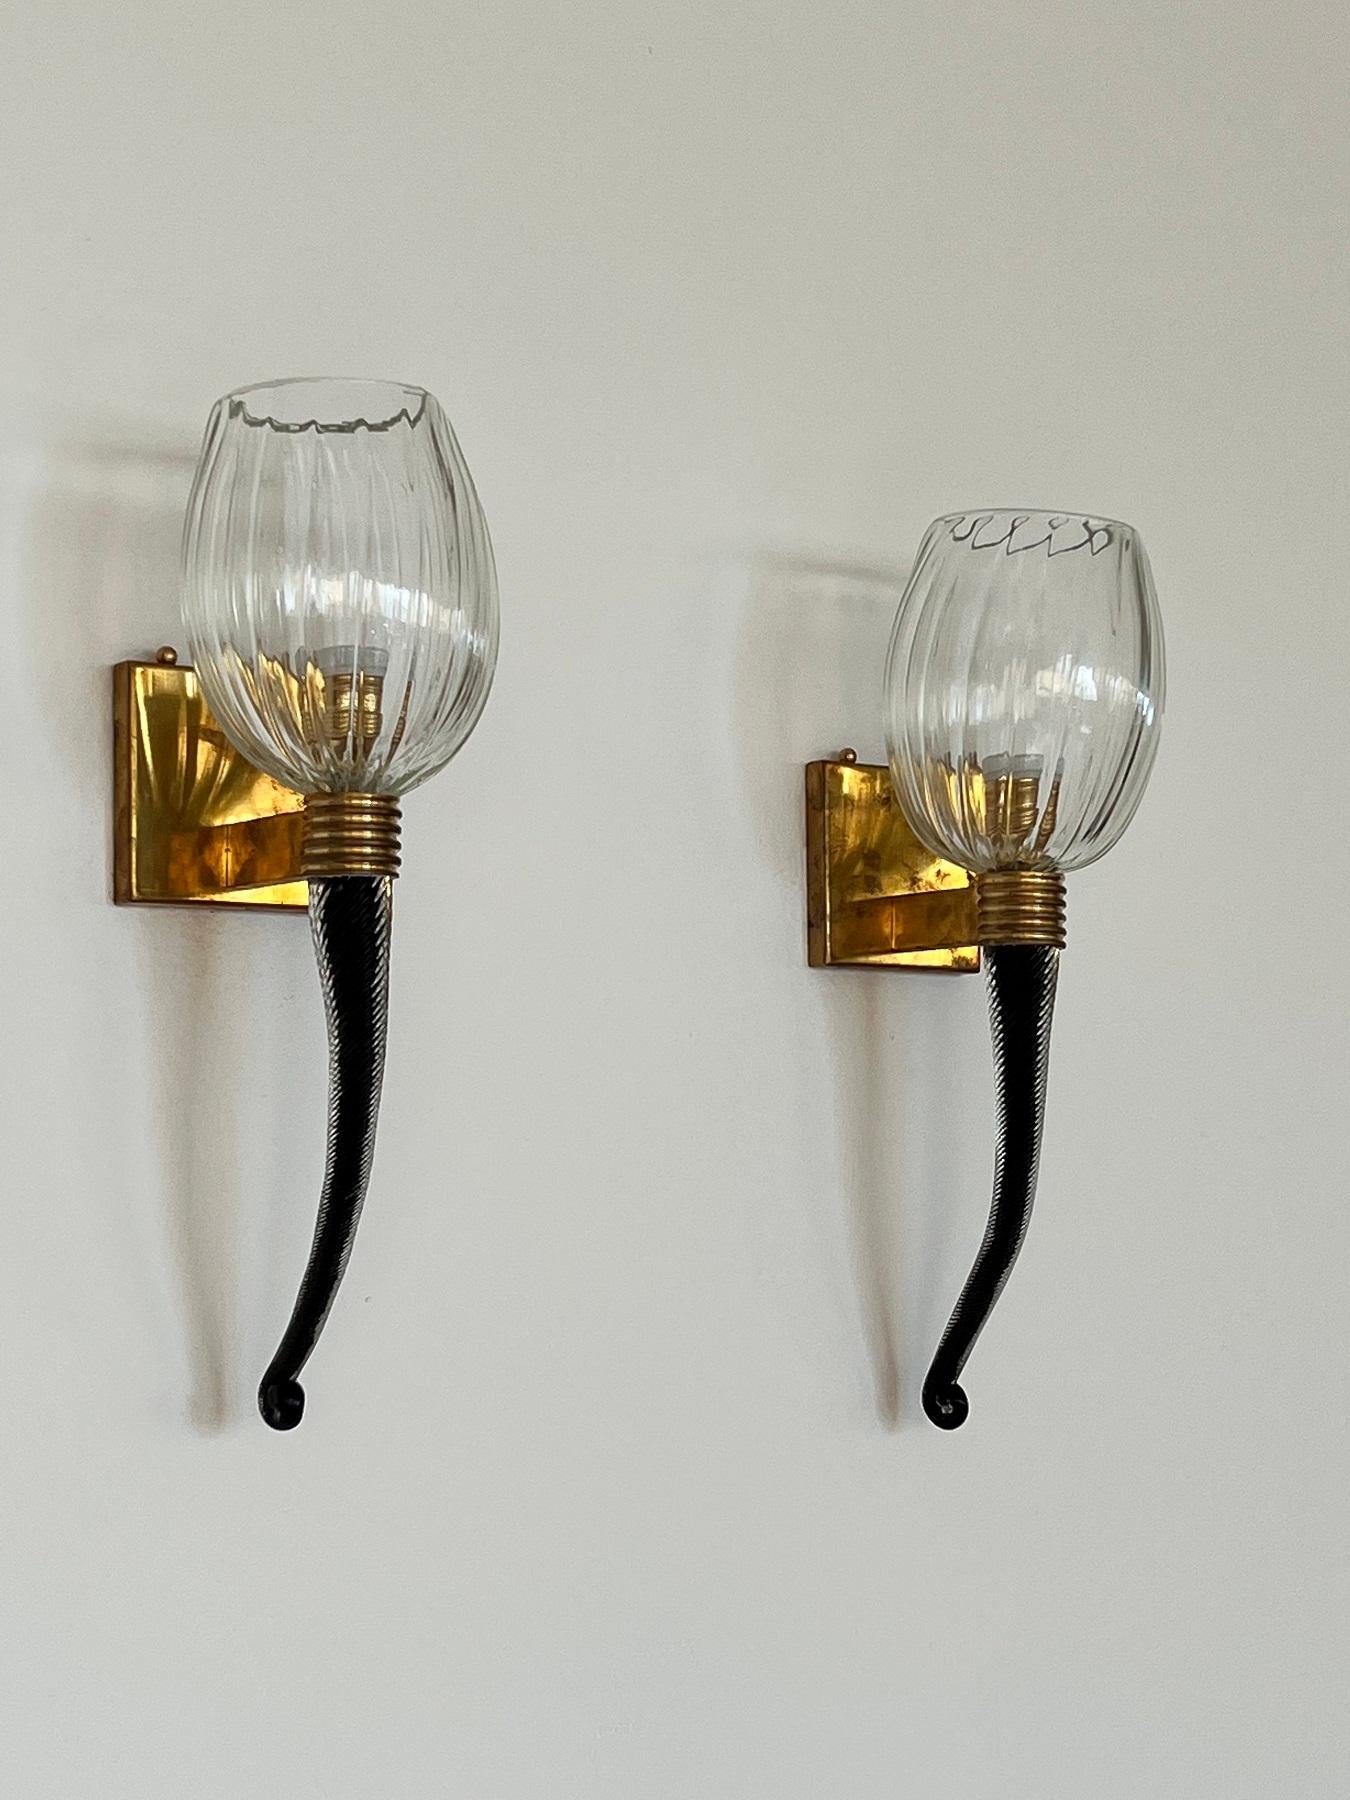 Italian Large Murano Glass Wall Lights or Sconces in Barovier Toso Style, 1990s For Sale 2